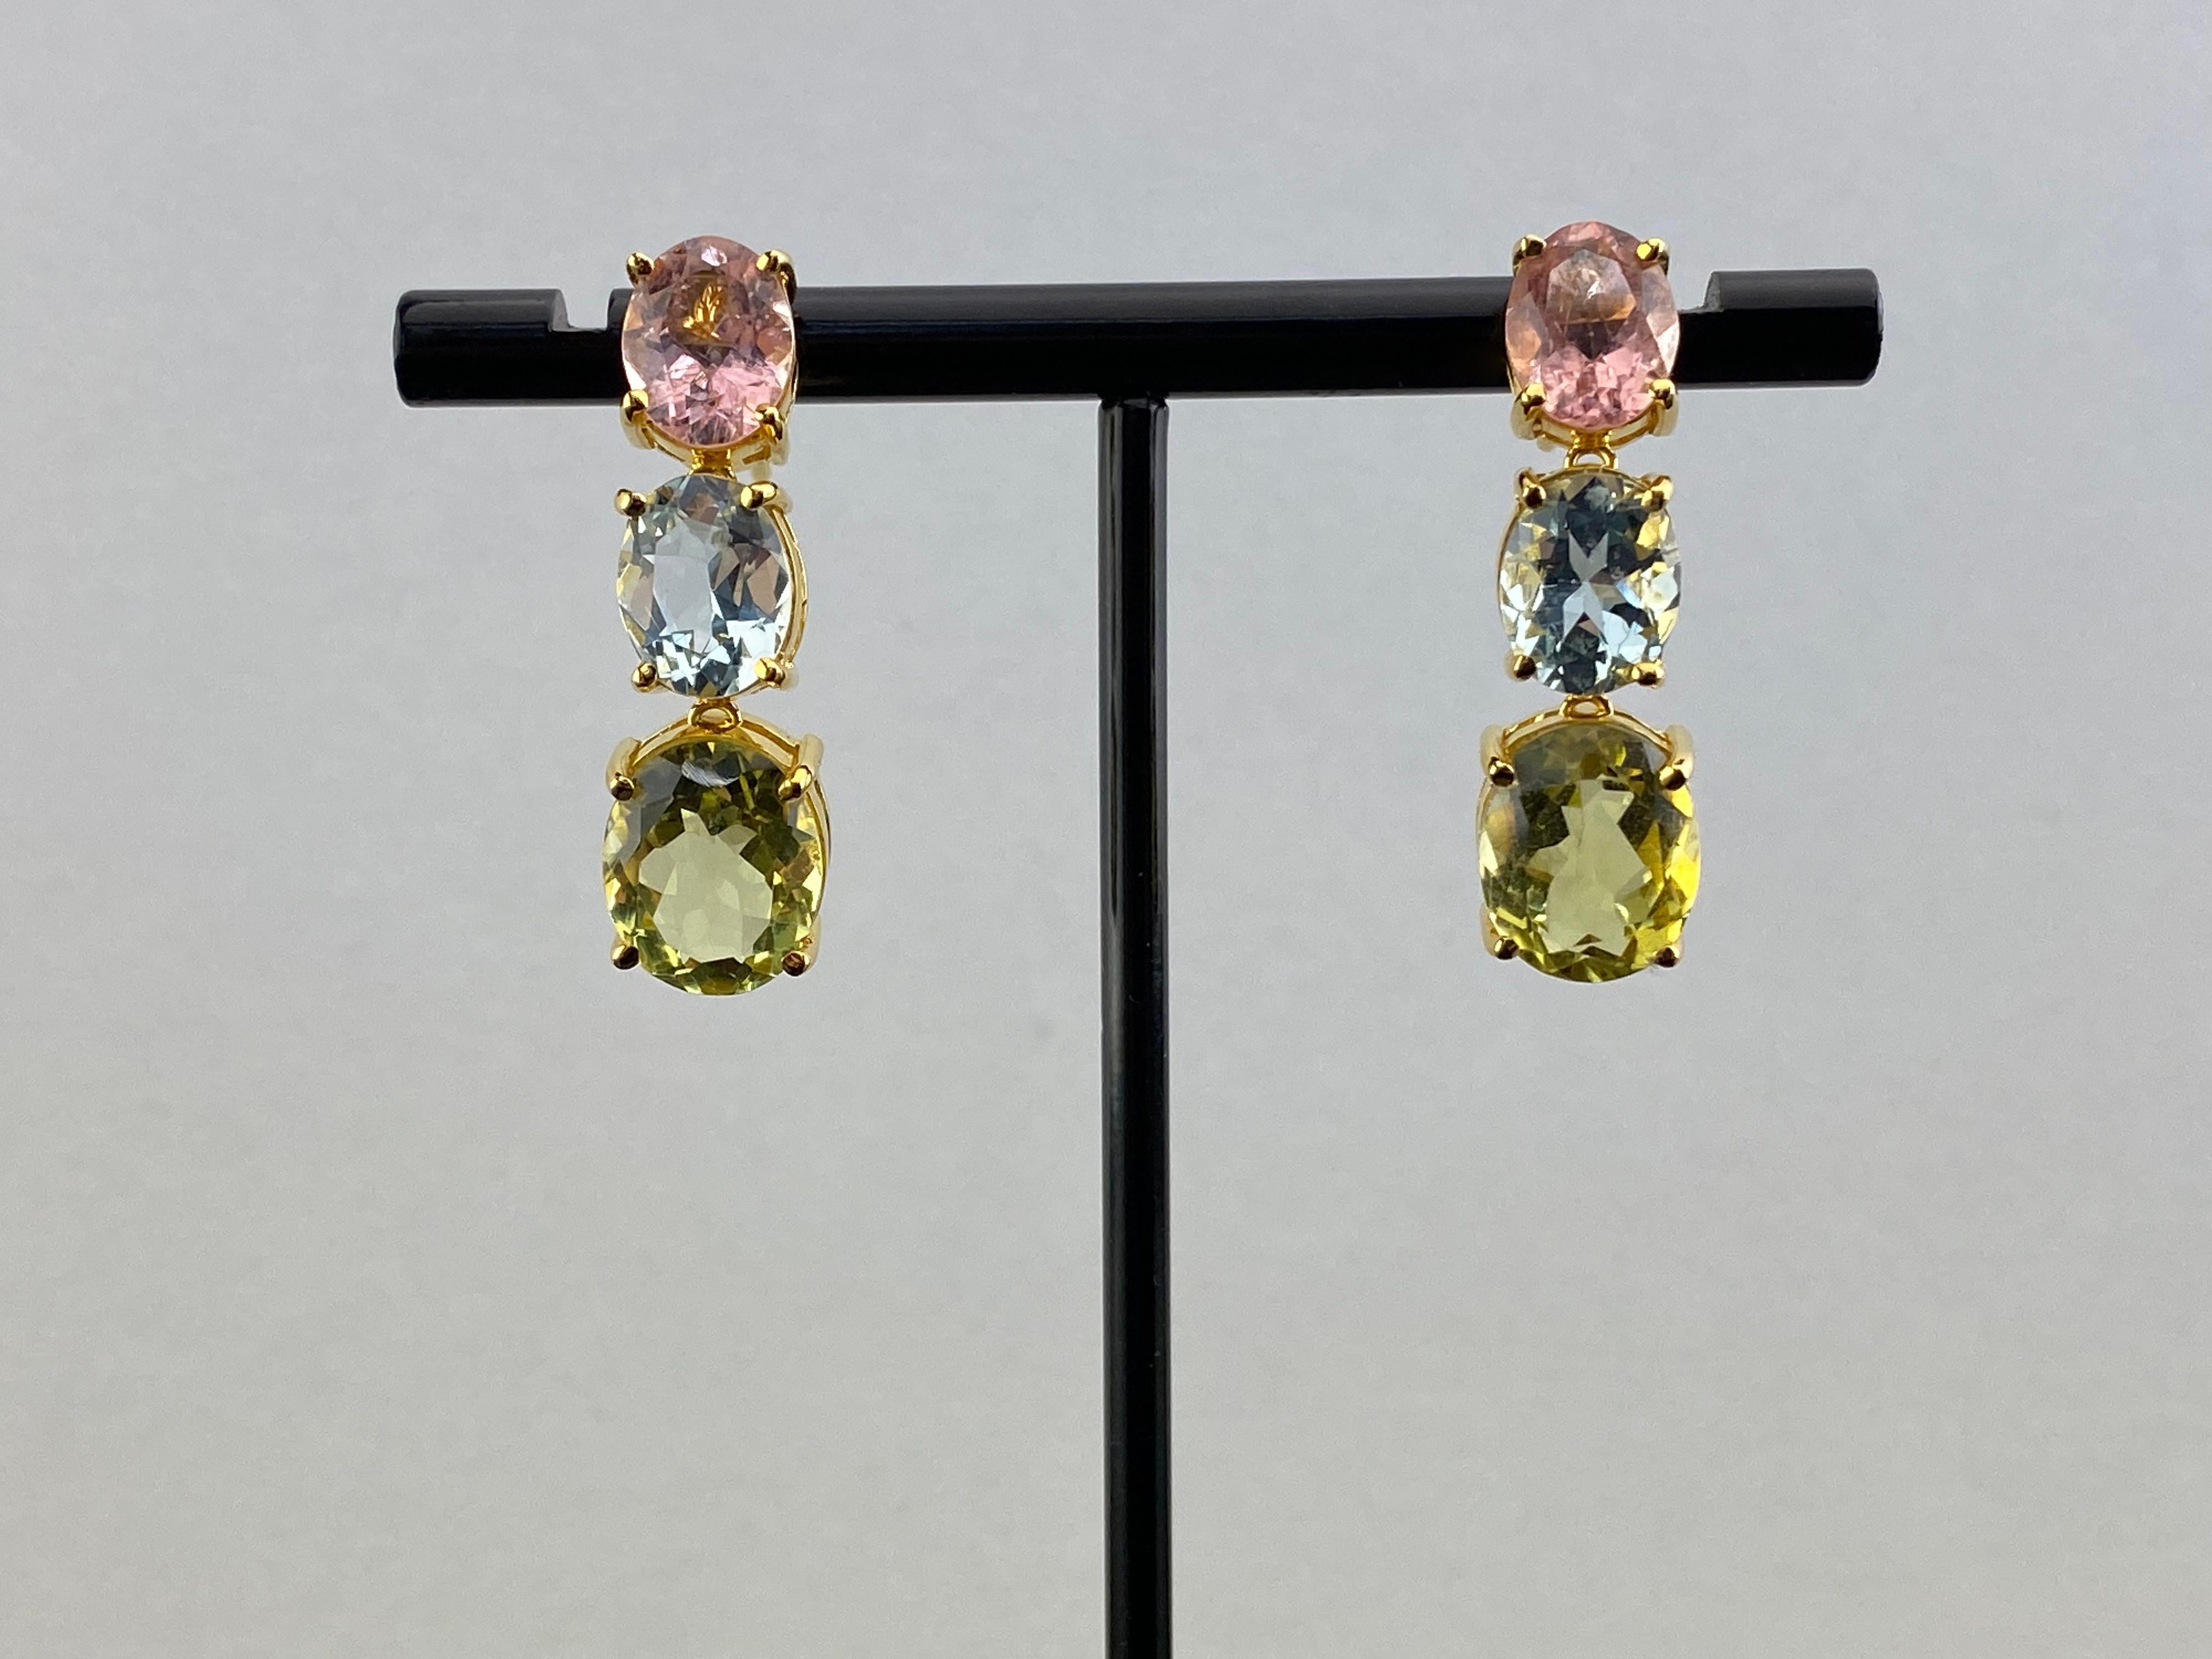 A stunning pair of oval shaped natural Tourmaline, Aquamarine and Quartz dangle earrings, weighing a total of 13.58 carats. The color combination oof pink, blue, and green make these dangle earrings very versatile - and being set in 18K Rose Gold,